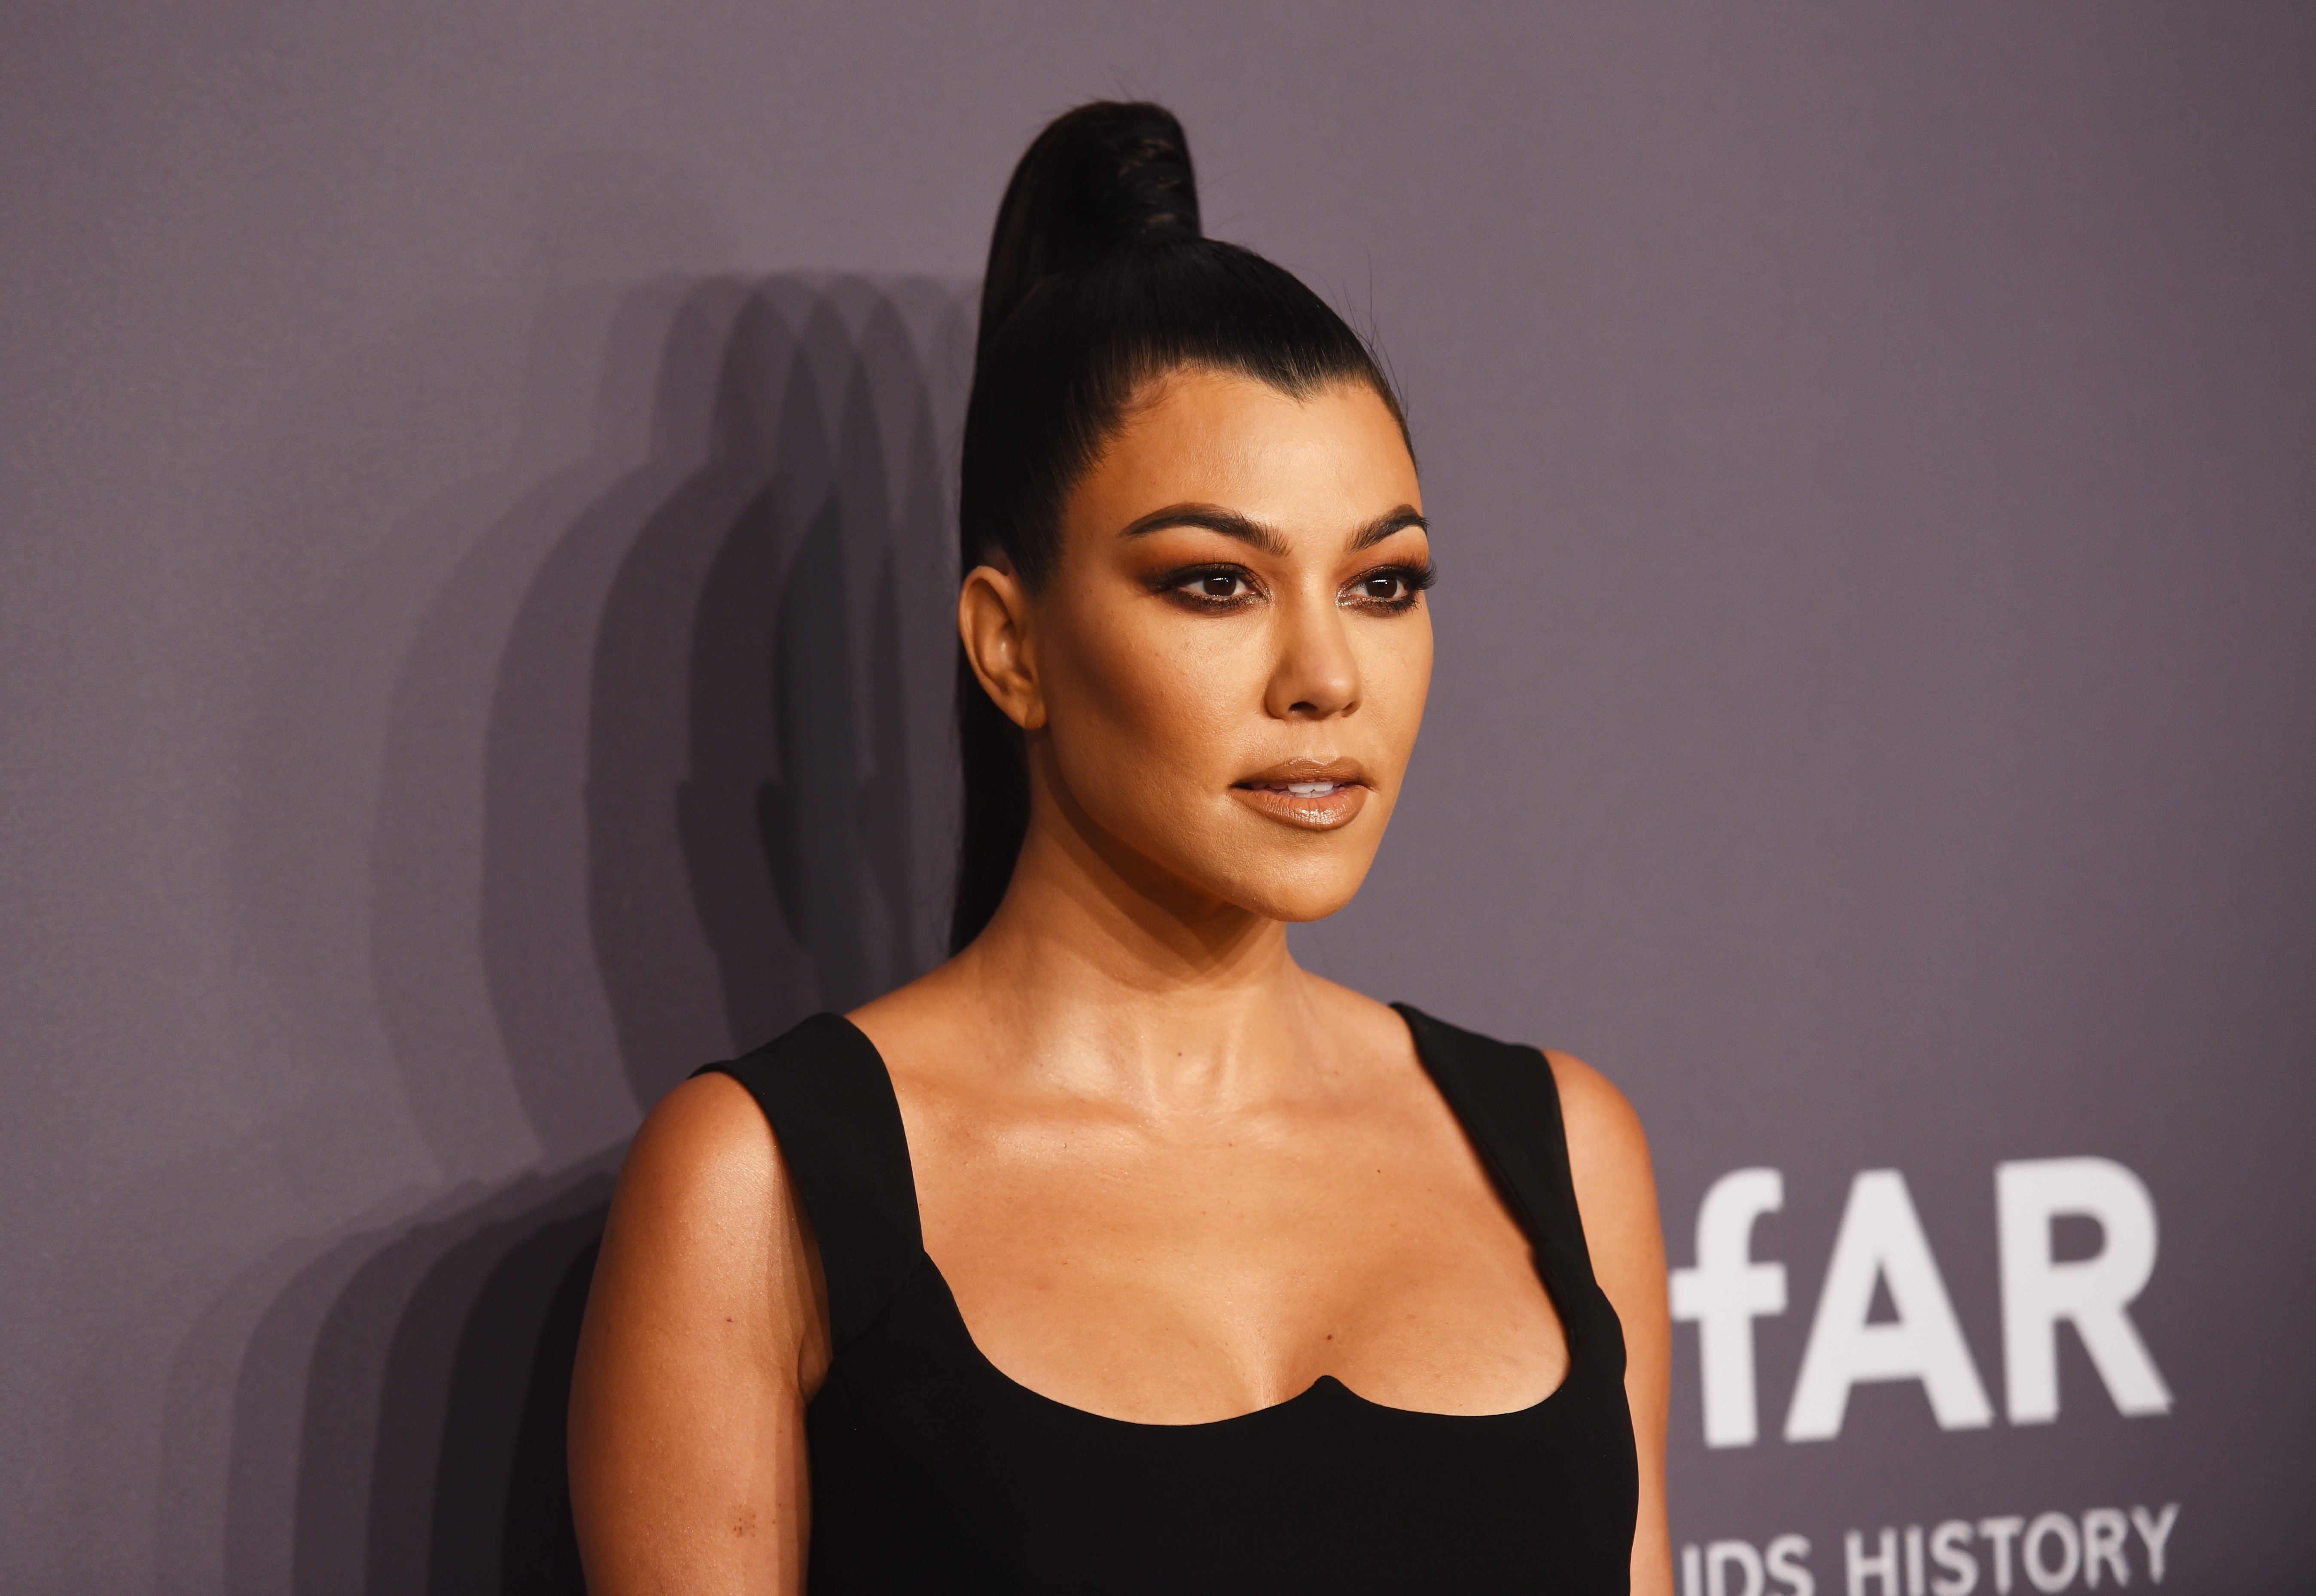 Kourtney Kardashian attends the amfAR New York Gala 2019 at Cipriani Wall Street on February 6, 2019 in New York City | Photo: Getty Images